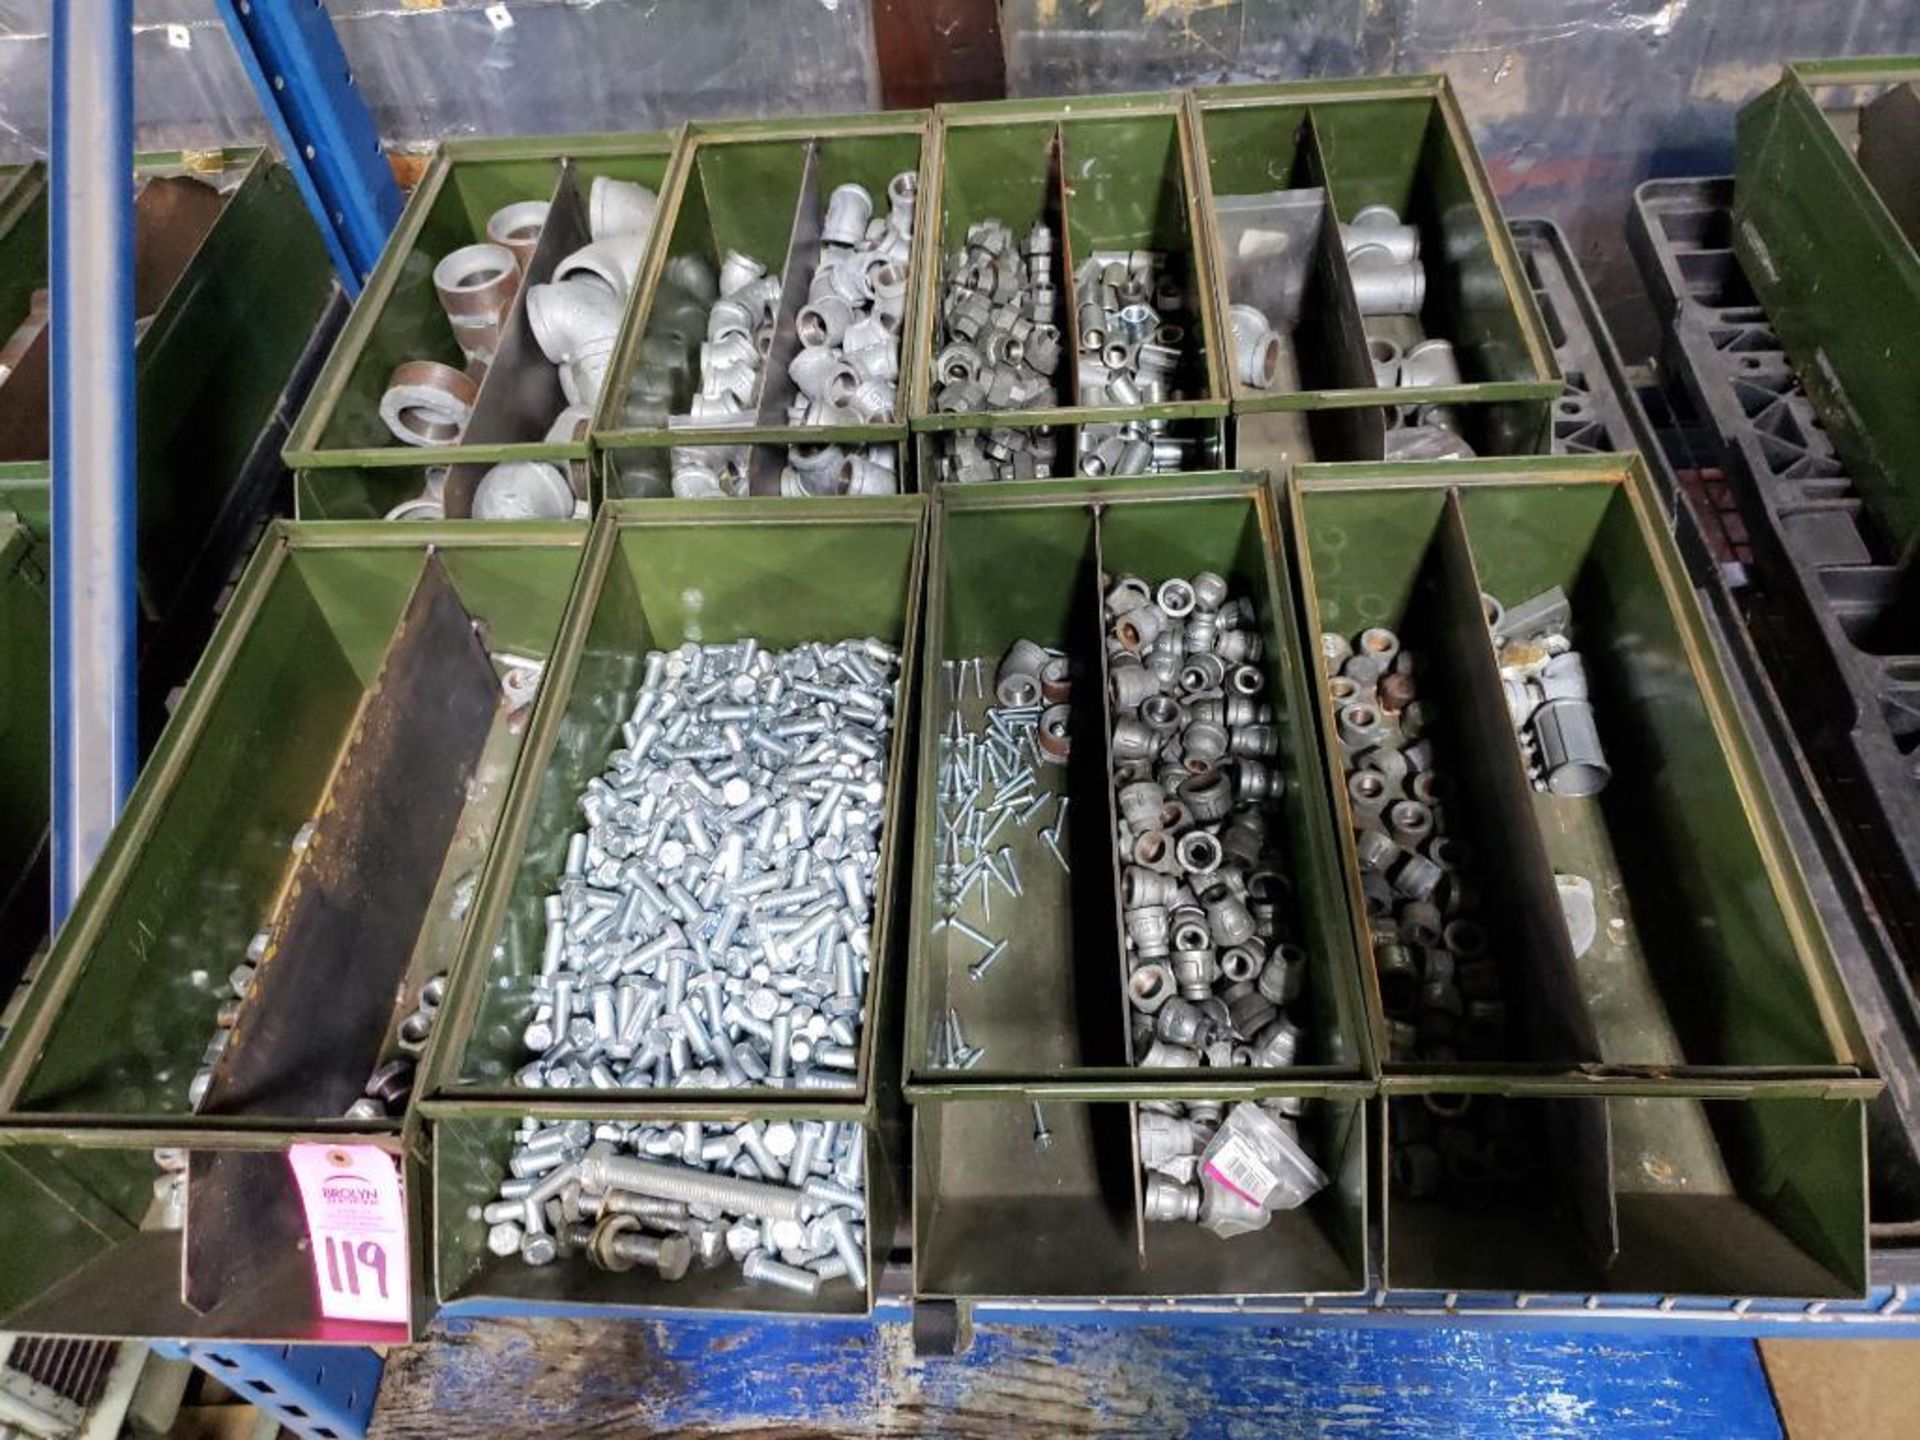 Pallet of assorted hardware and stack on bins.